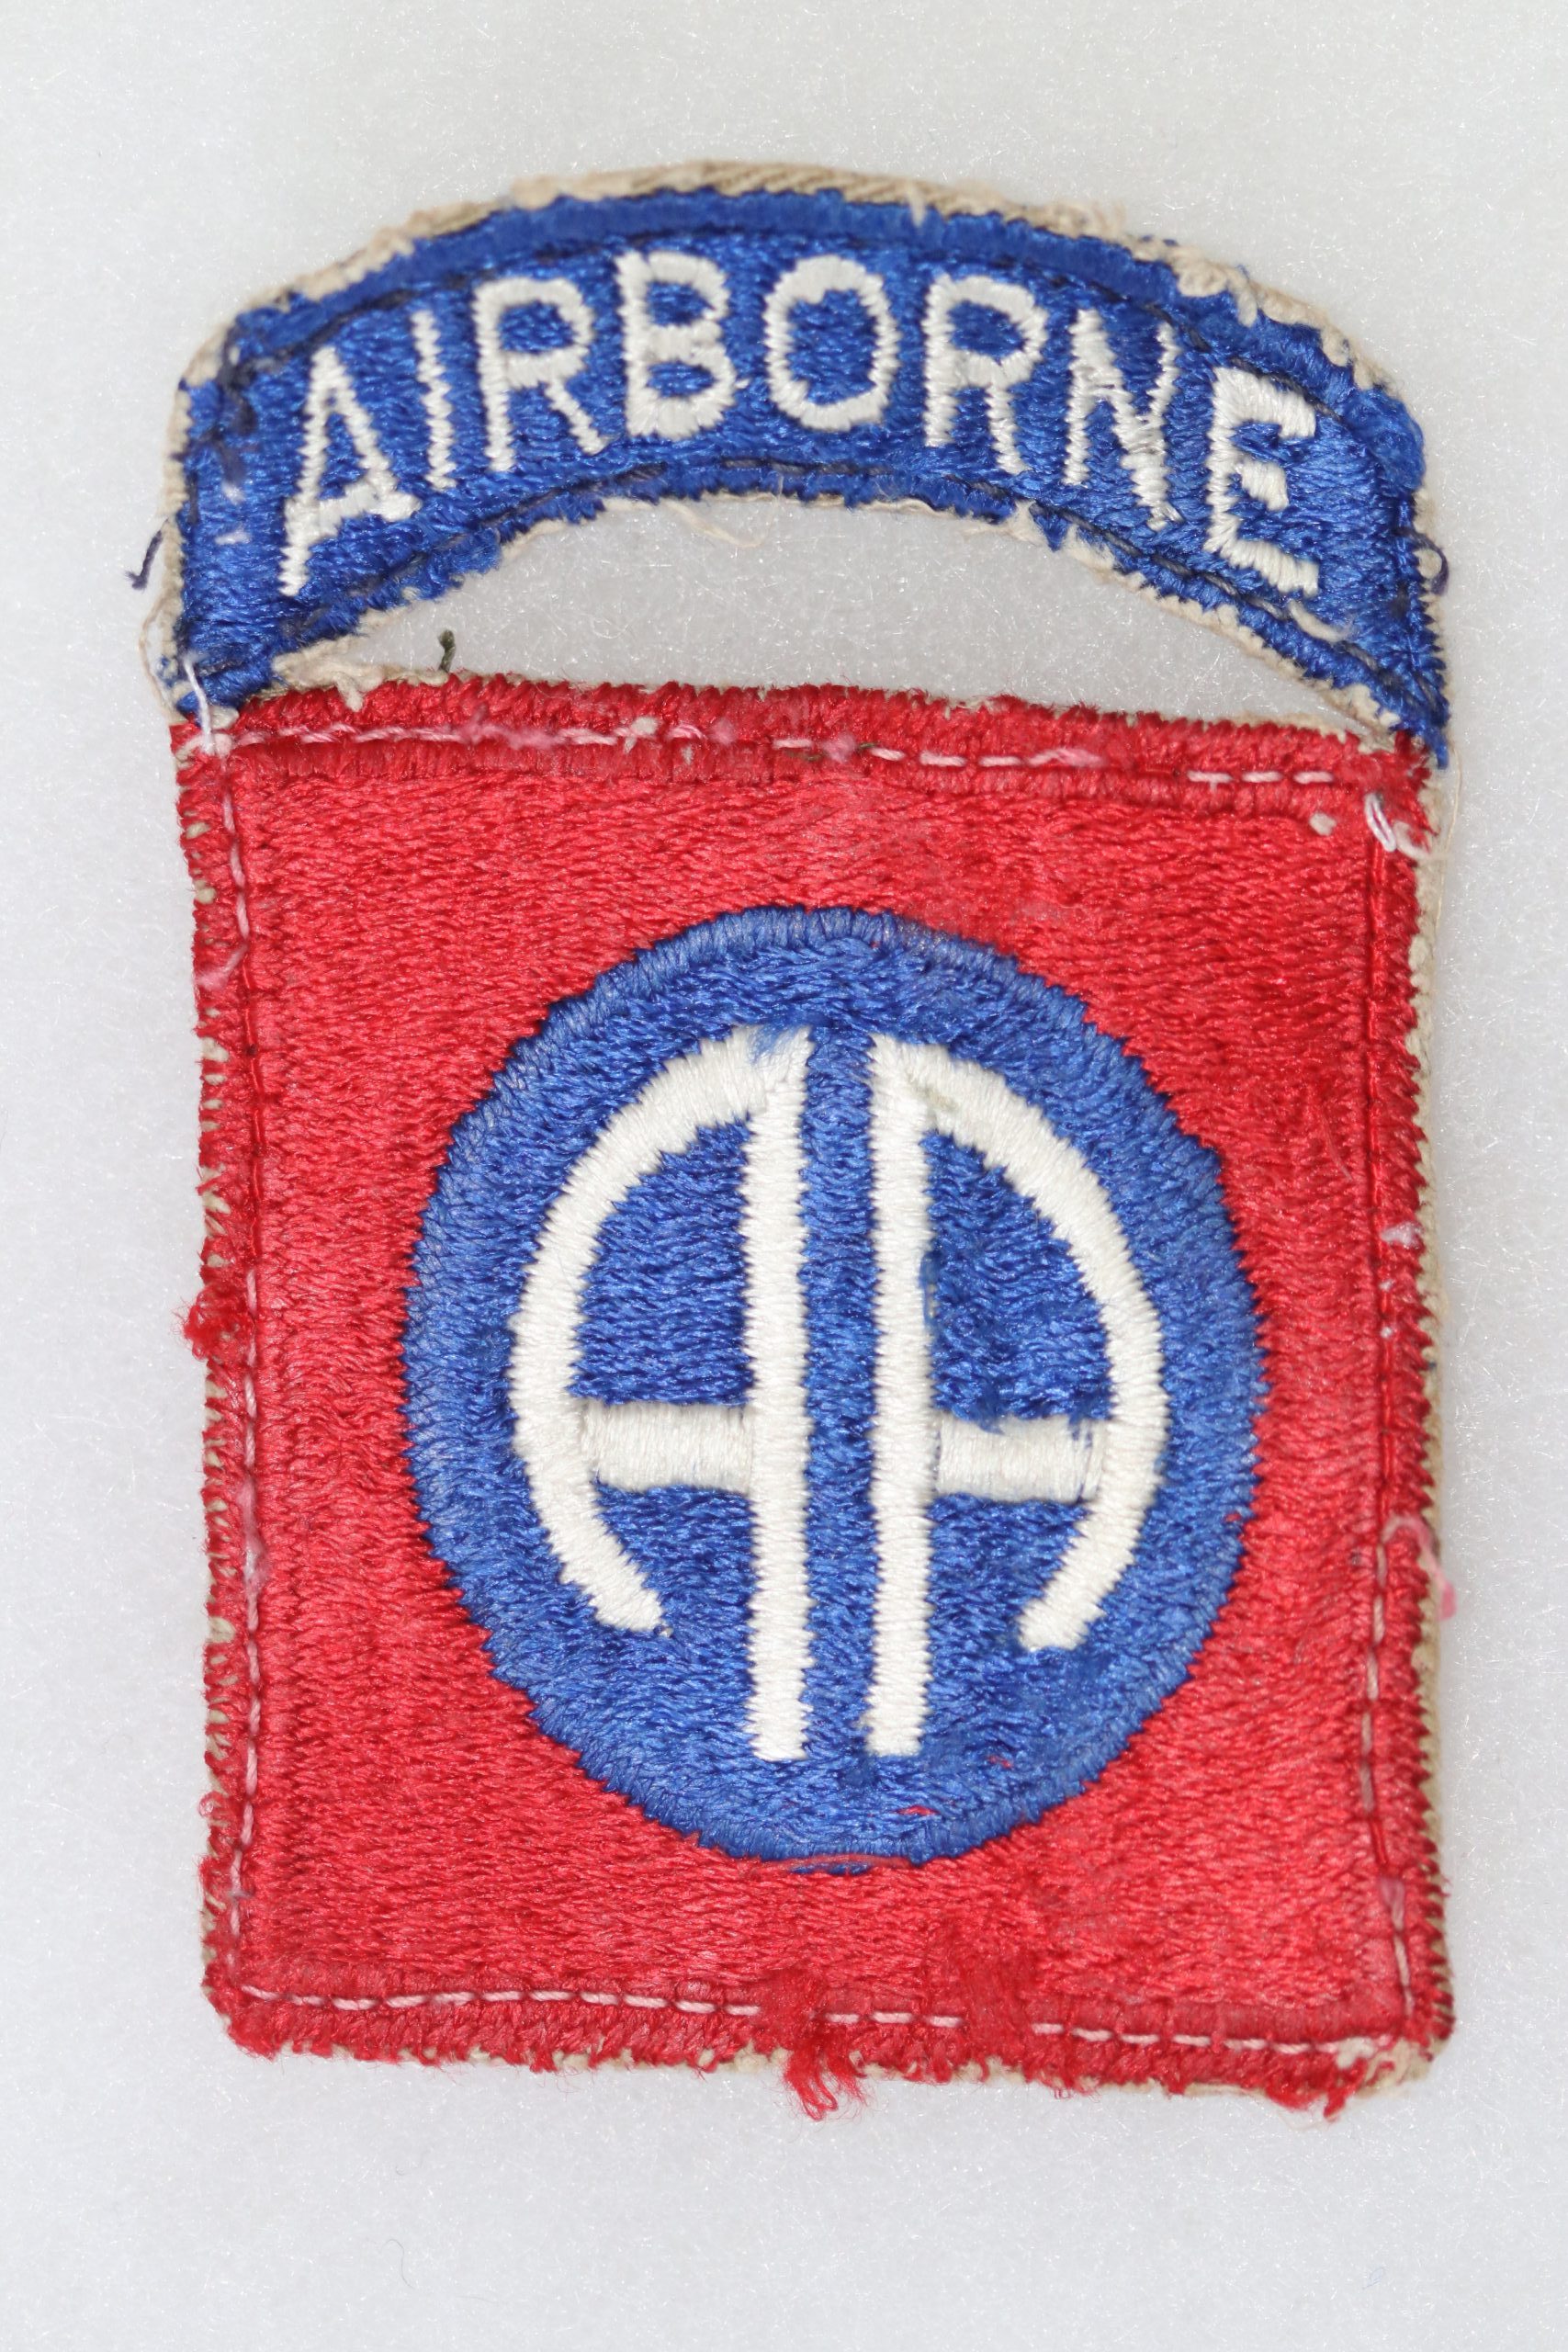 H040906 AIRBORNE  embroidered shoulder cloth patch 